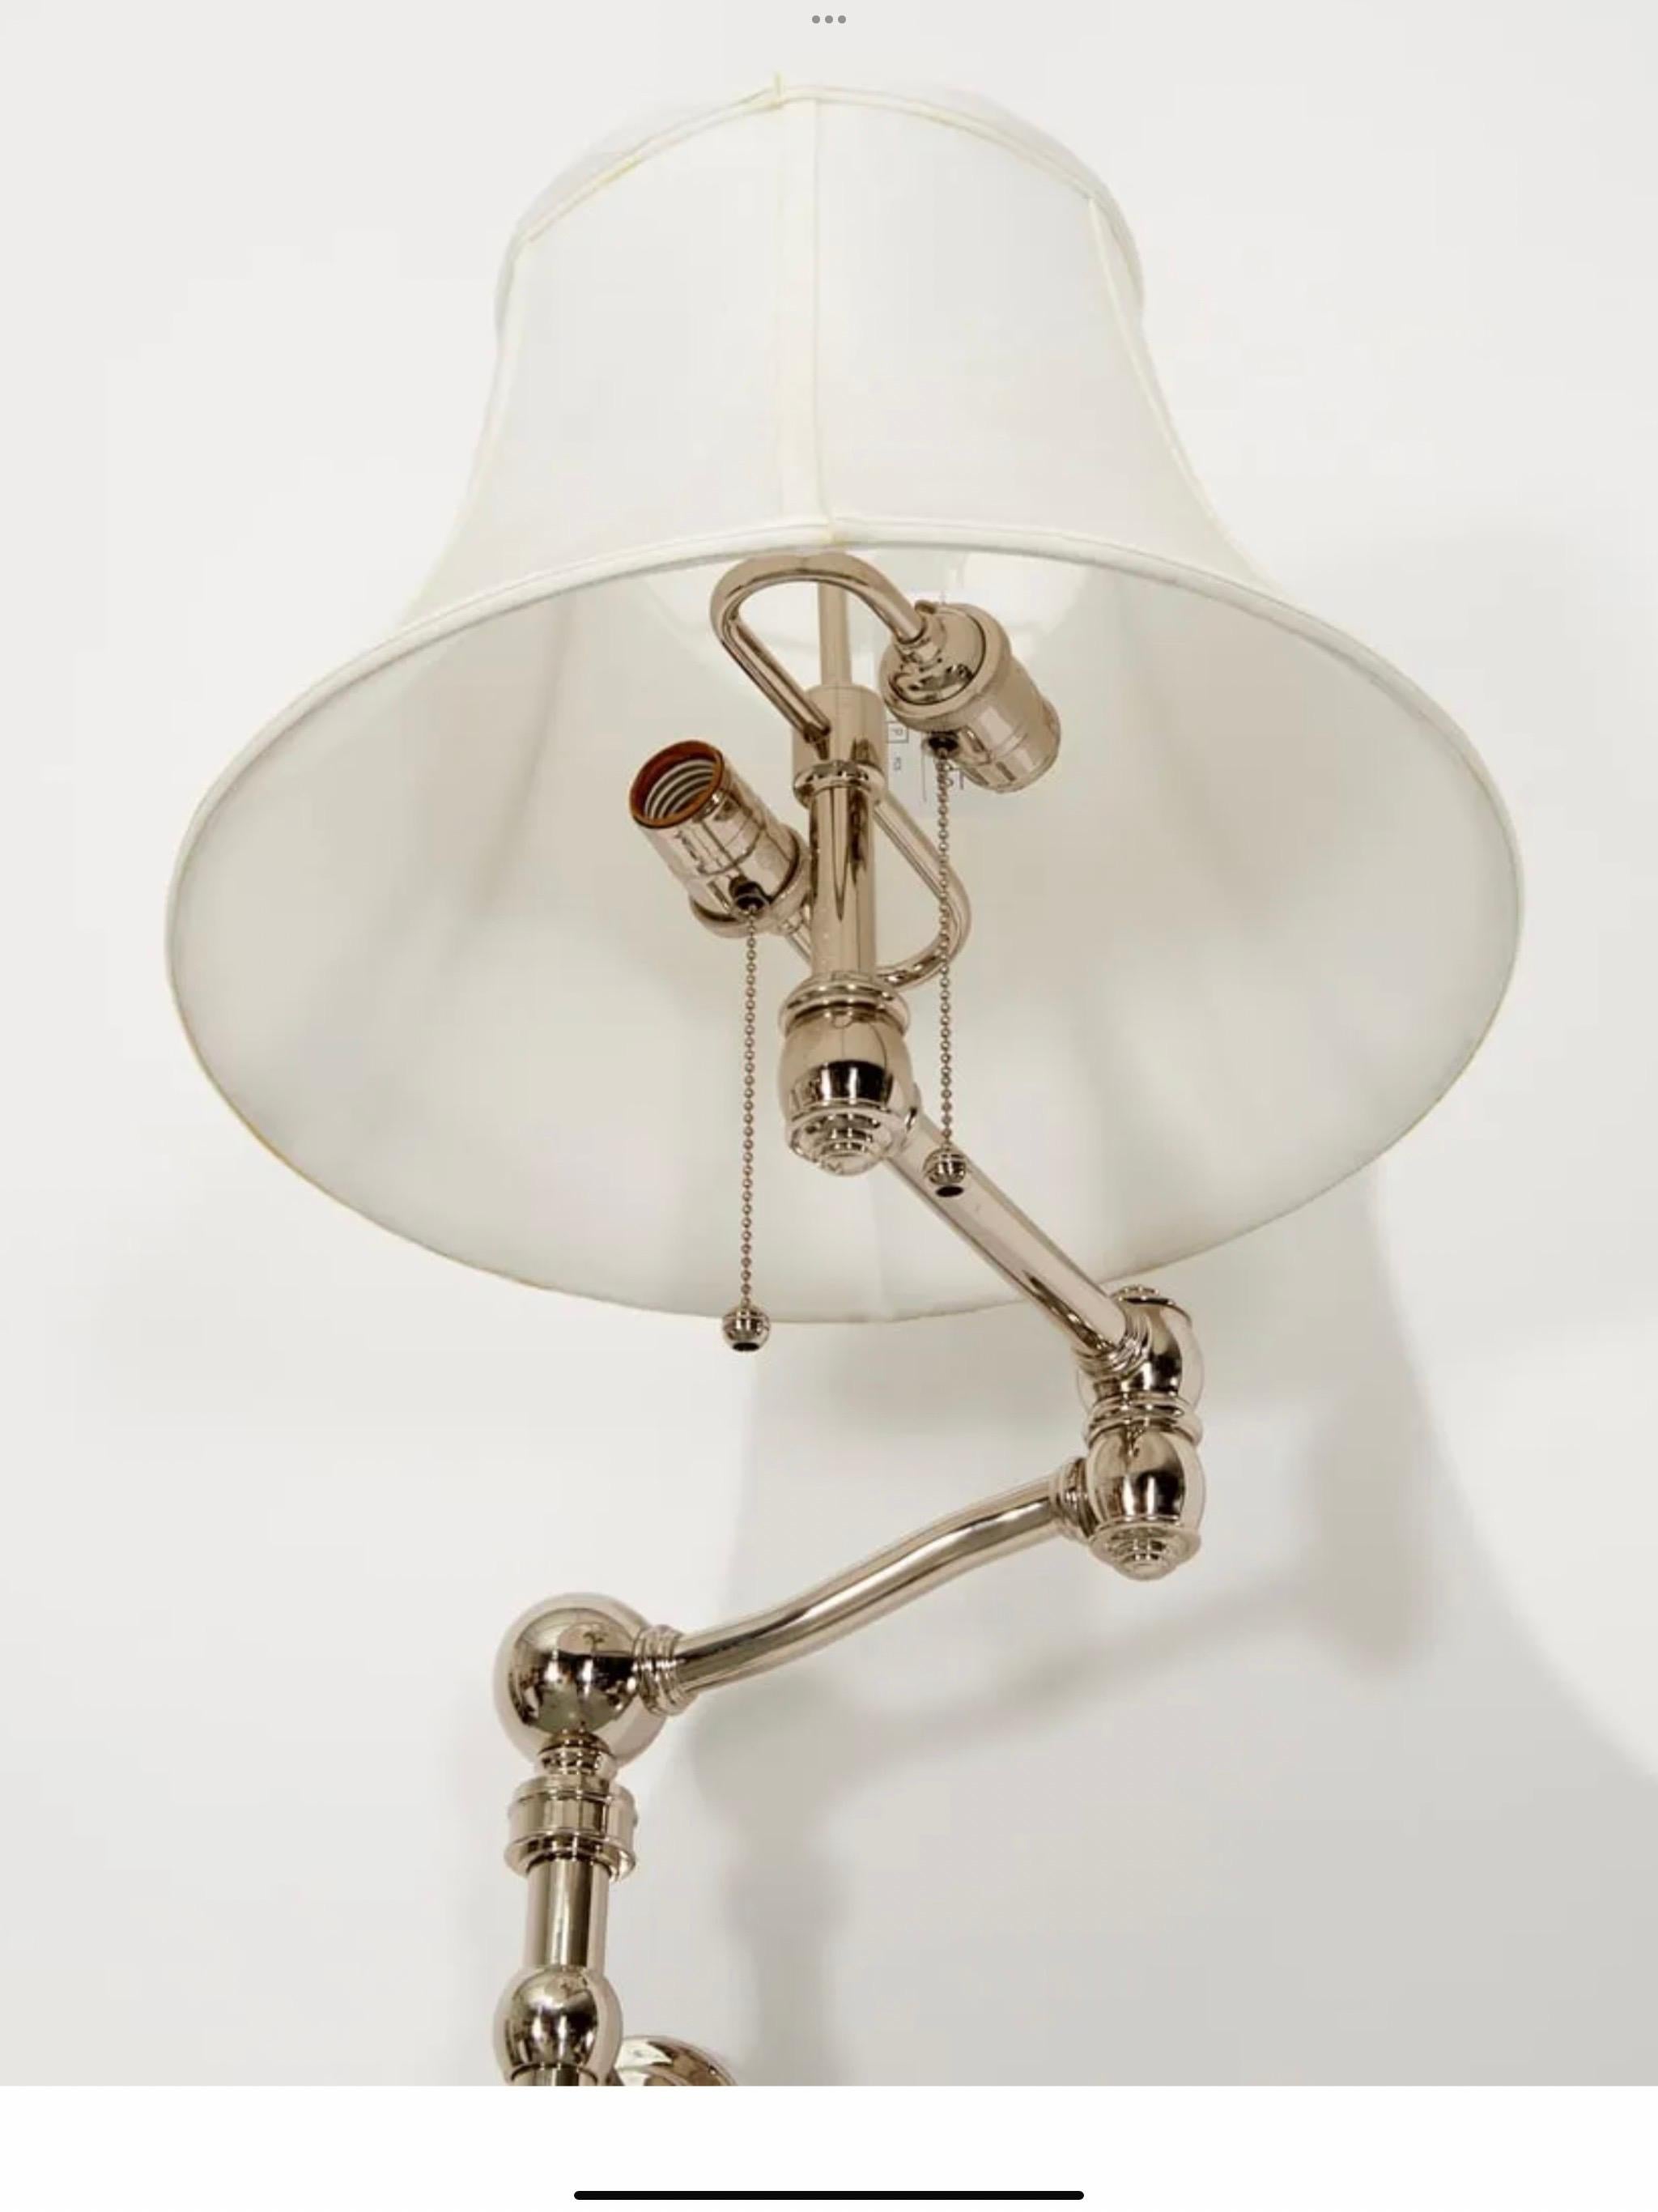 Pair Ralph Lauren 'Sargent' swing arm wall lamps, c., 2-light wall articulated wall sconce, in 